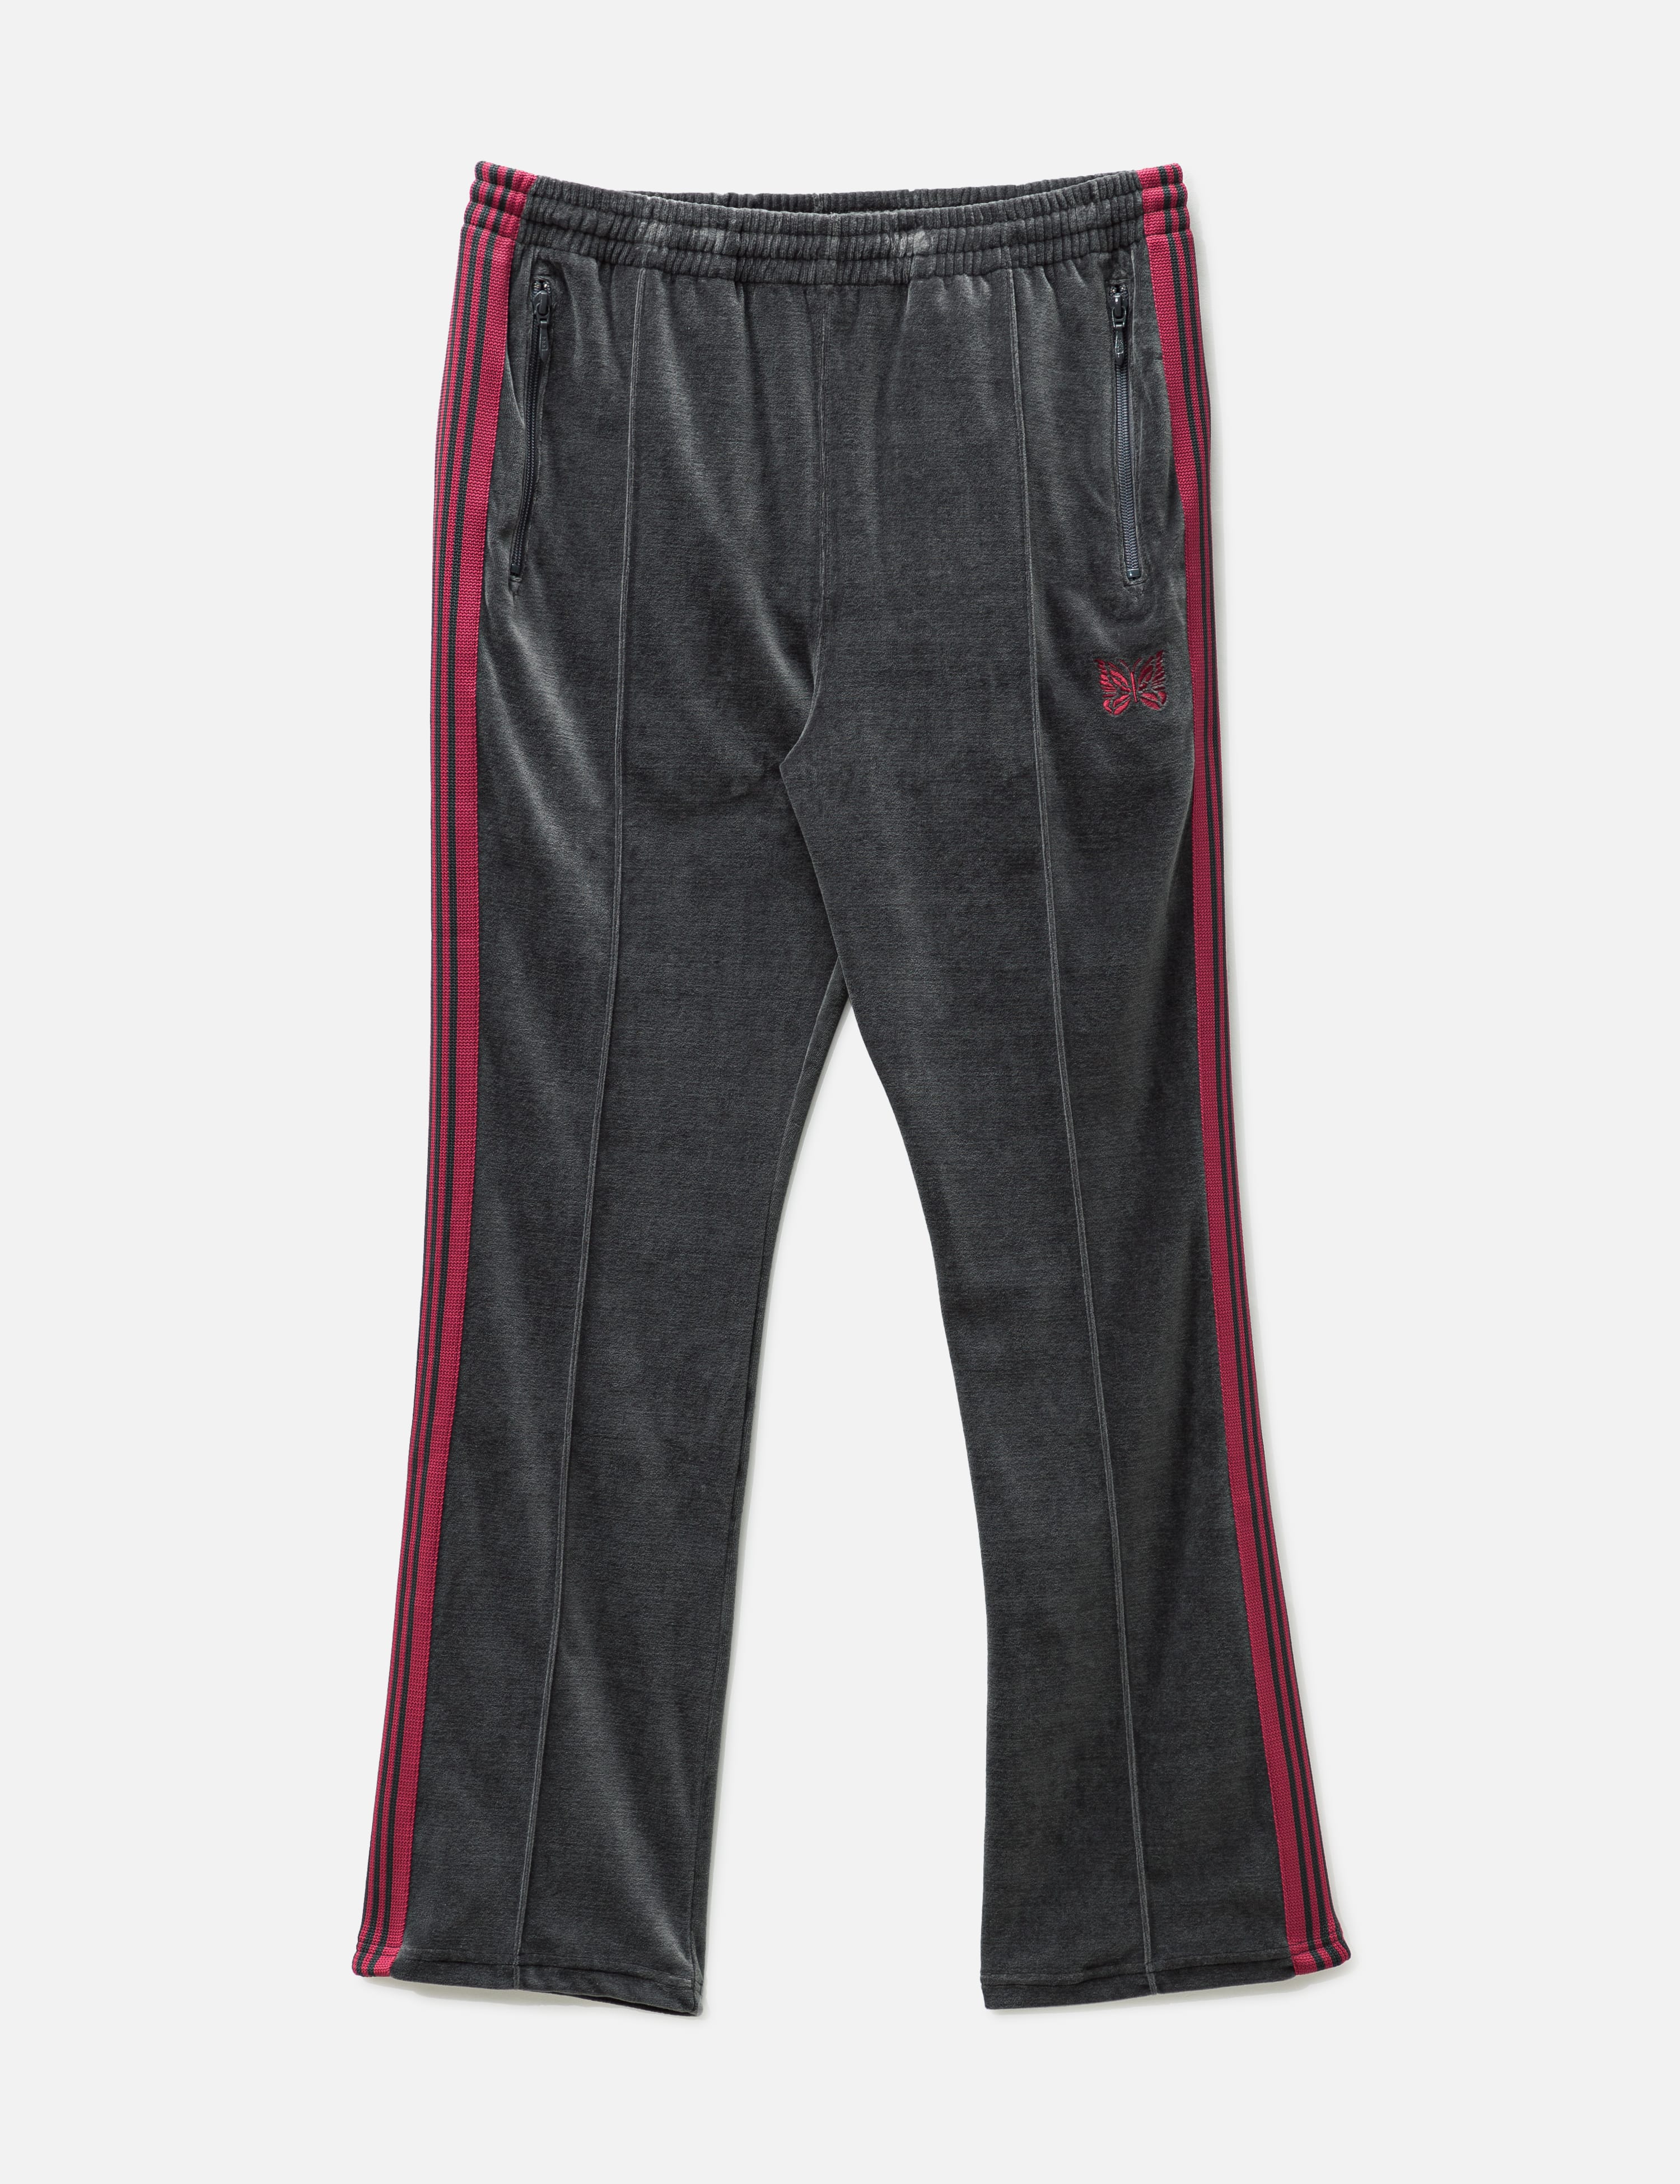 Needles - Narrow Track Pants | HBX - Globally Curated Fashion and